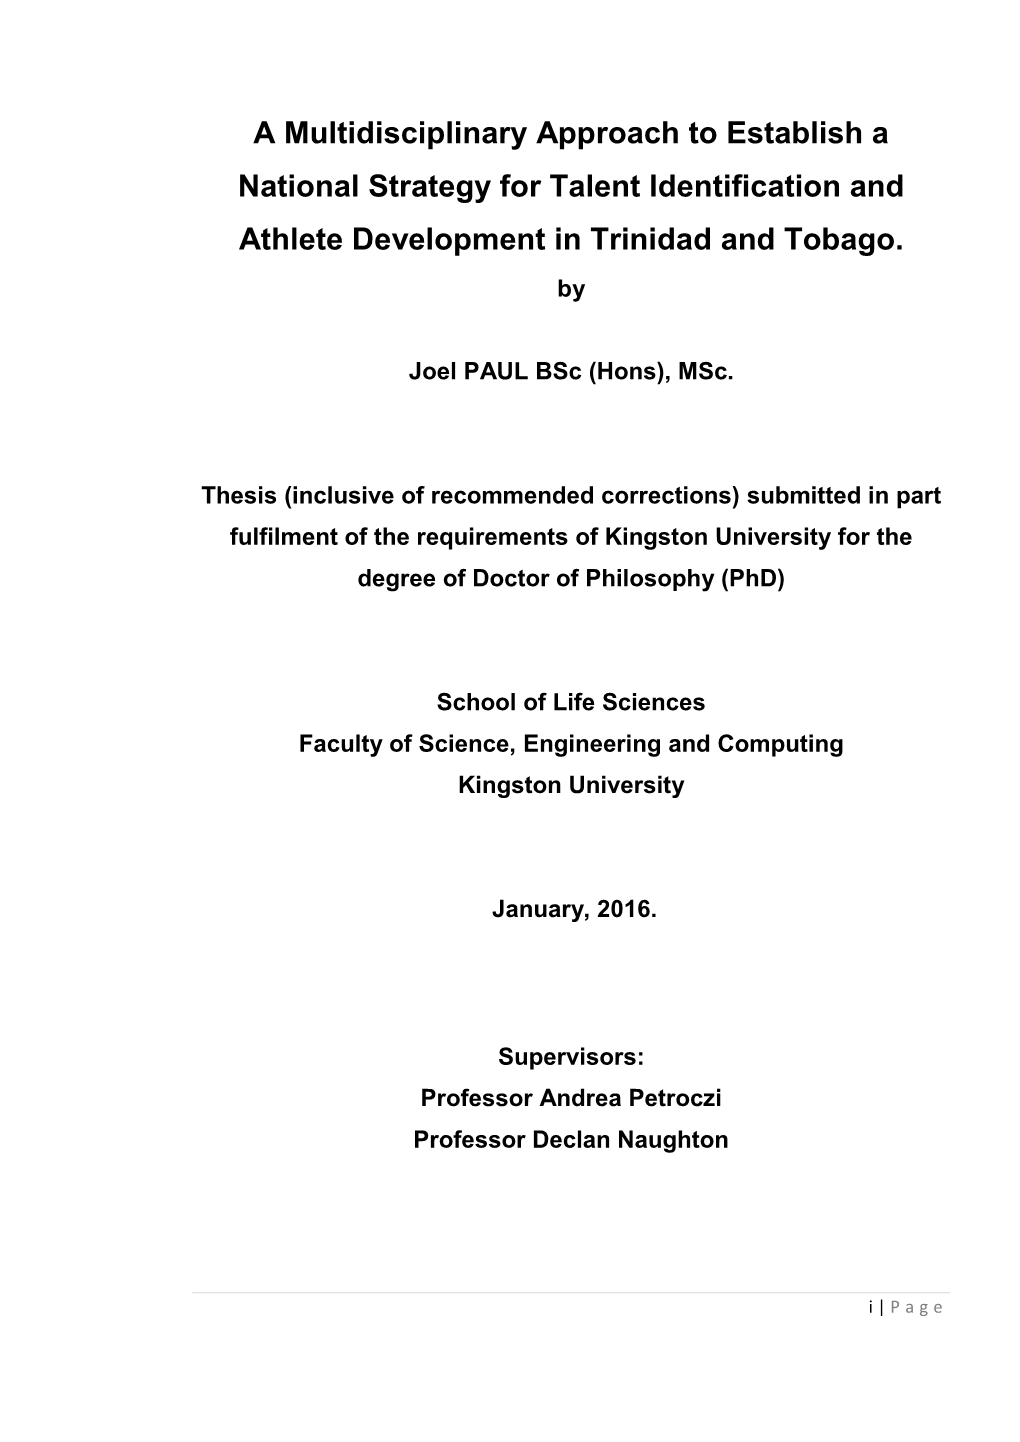 A Multidisciplinary Approach to Establish a National Strategy for Talent Identification and Athlete Development in Trinidad and Tobago